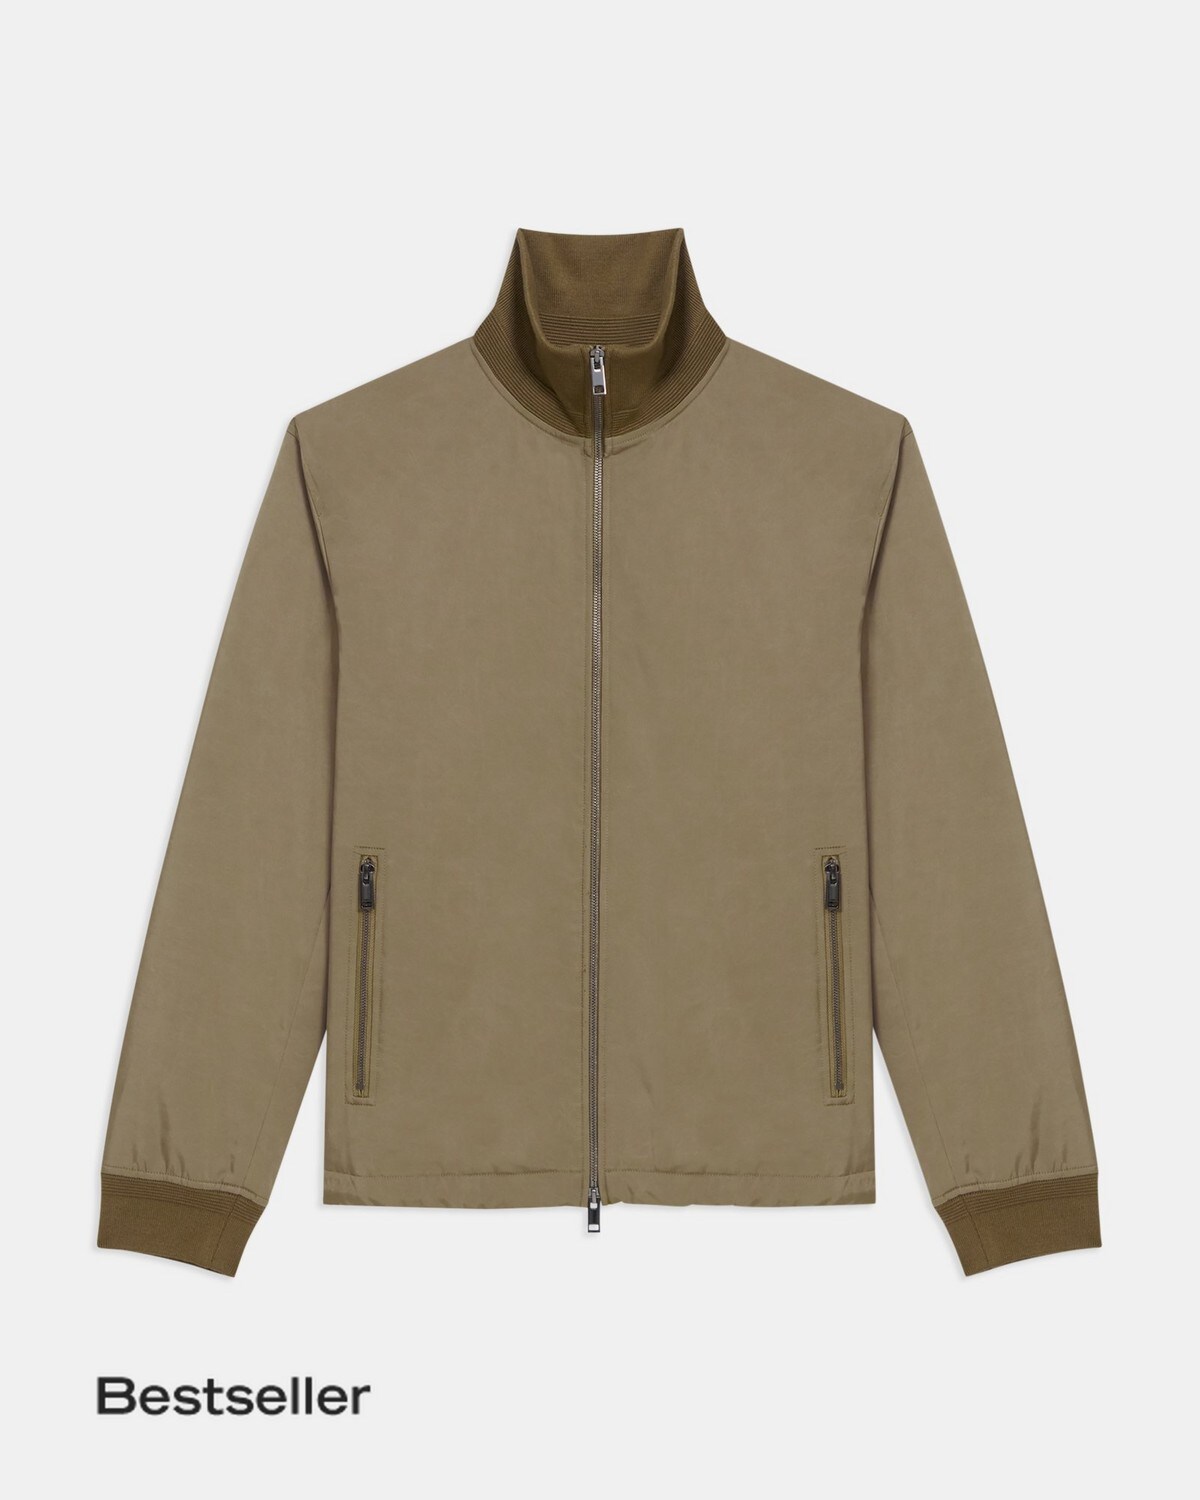 City Bomber Jacket in Water-Resistant Polyester